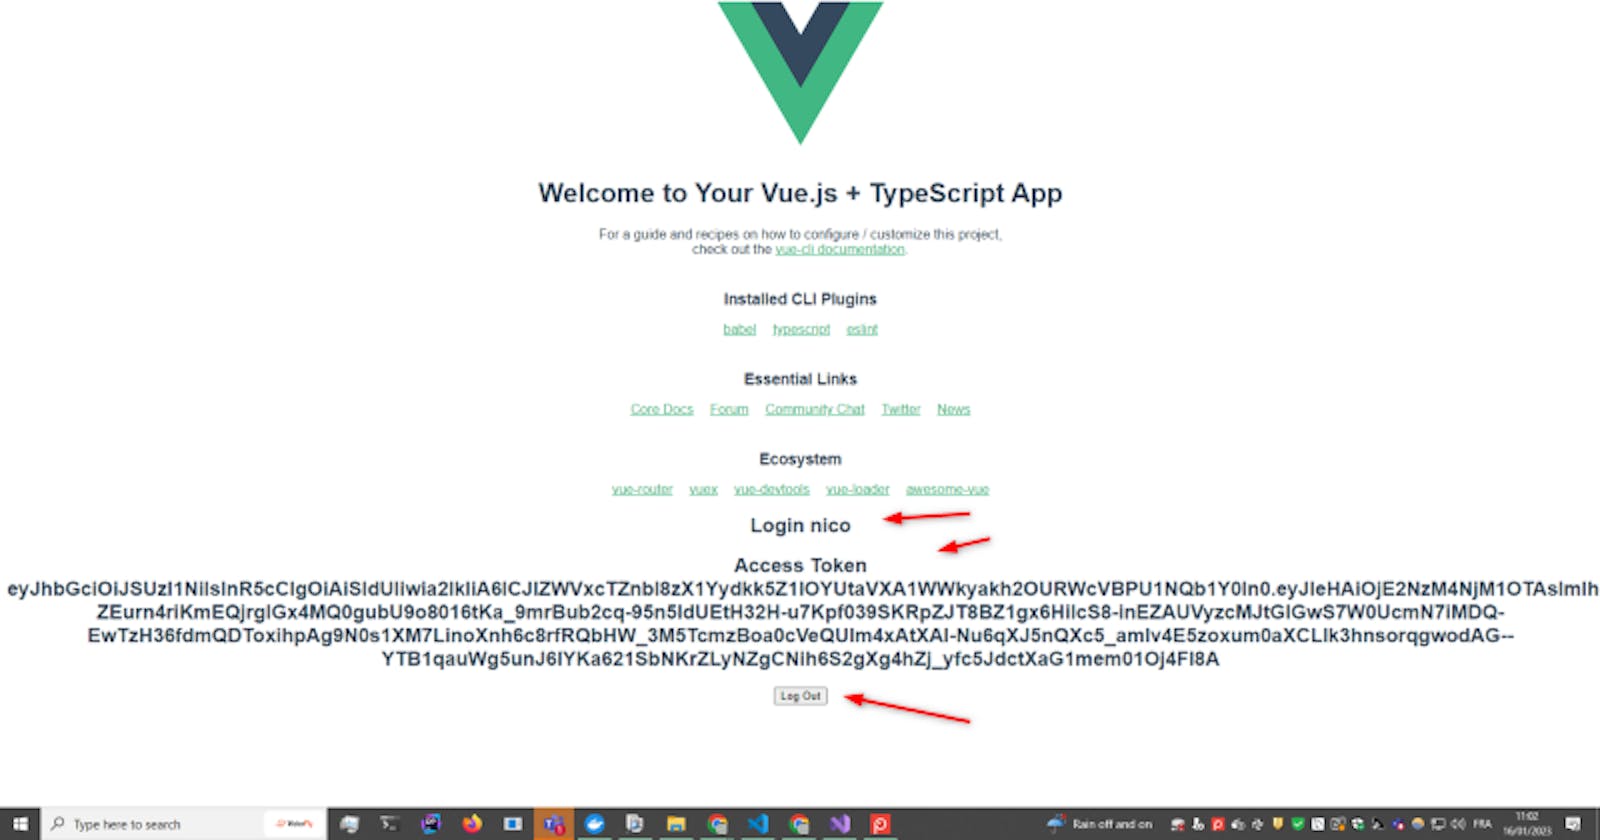 Security in Vuejs 3.0, with authentication and authorization by KeyCloak Part 2.